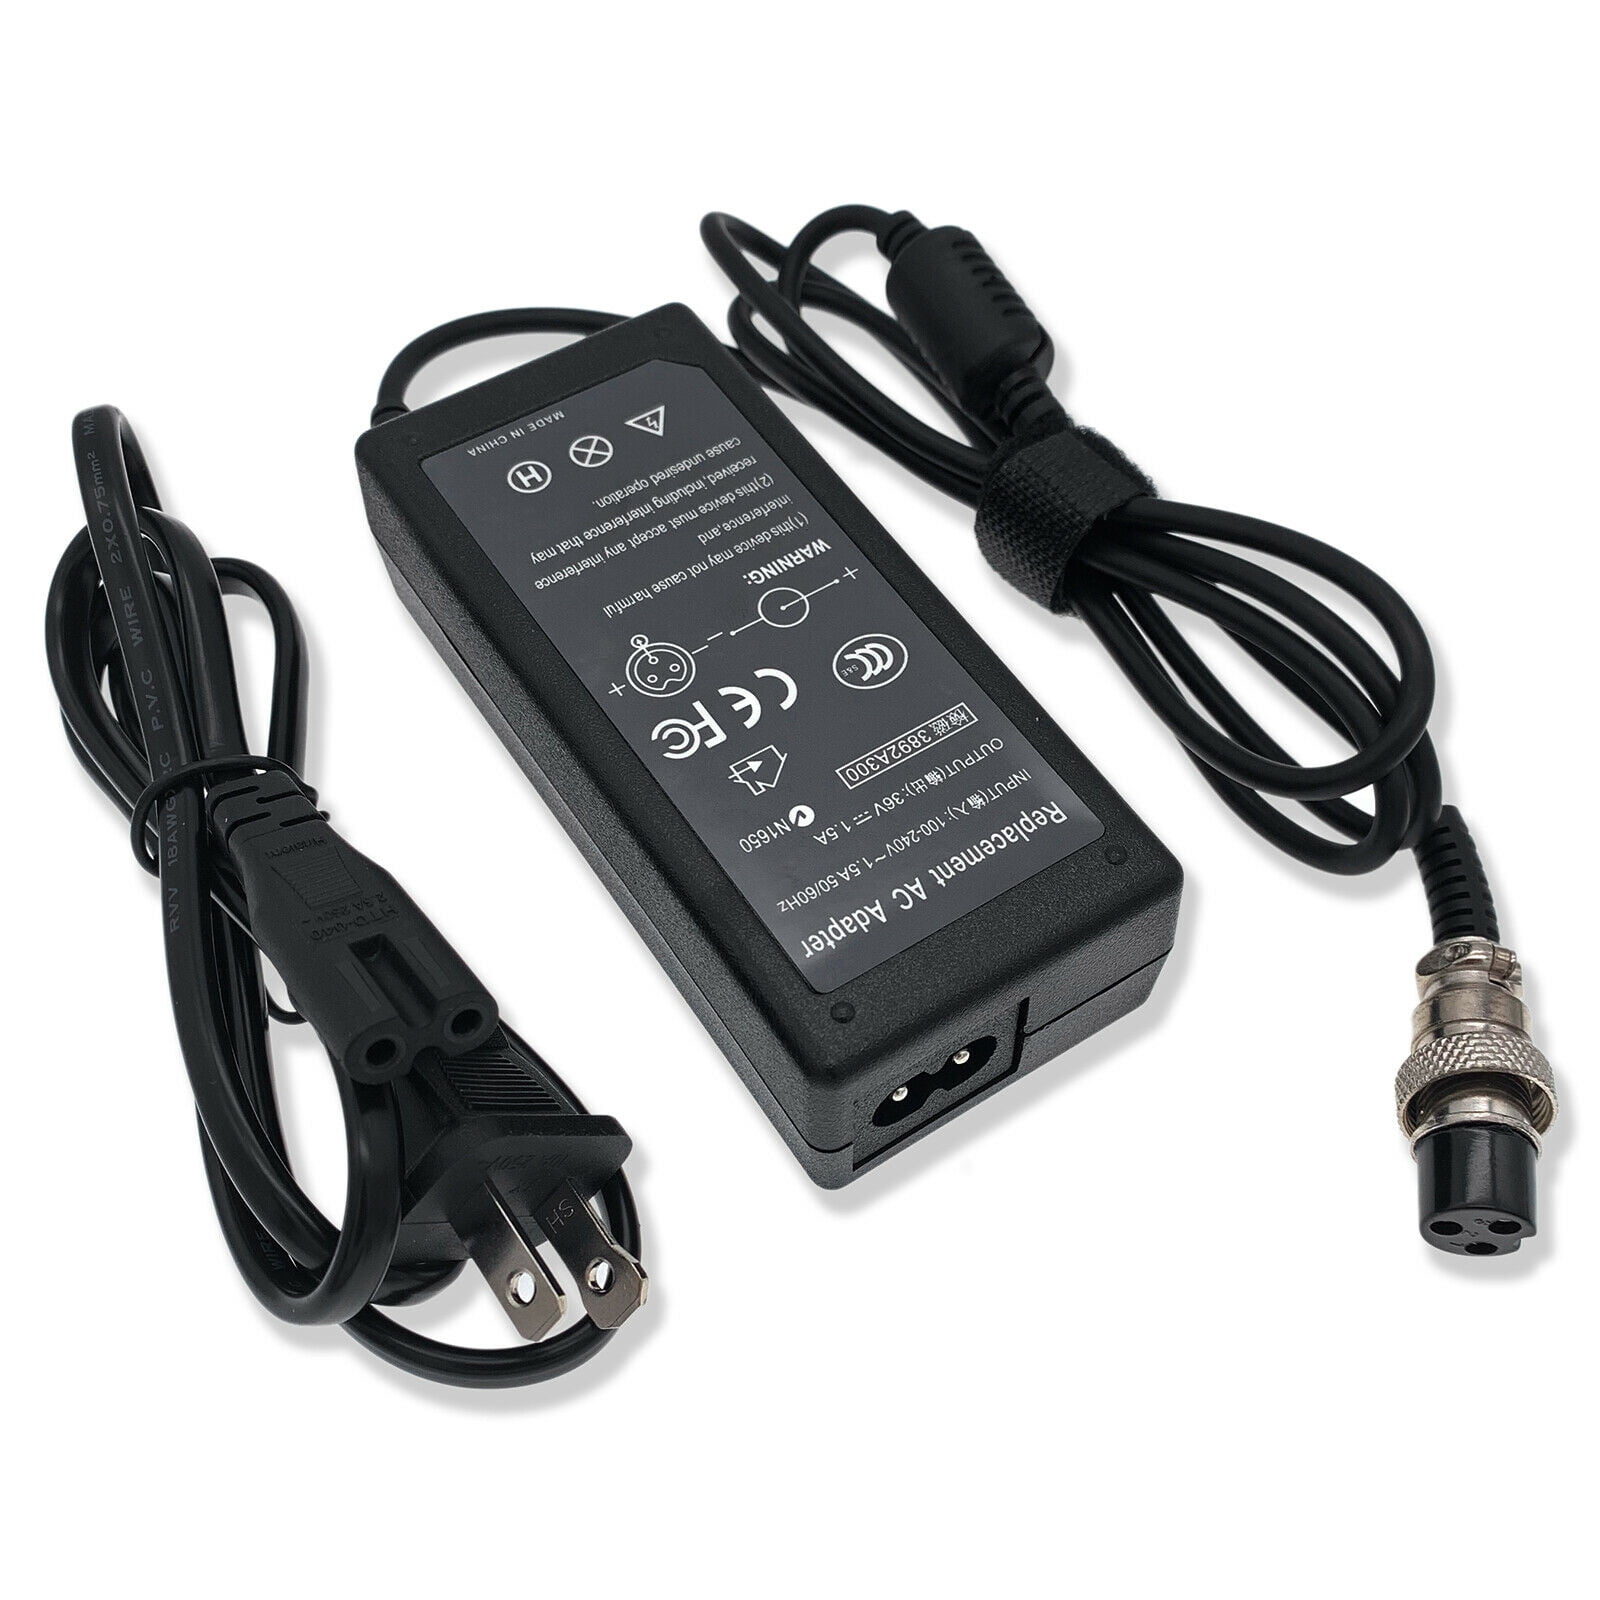 New 24V 4A 96W Electric Scooter Battery Charger For Hoveround mpv5 Chair Currie 